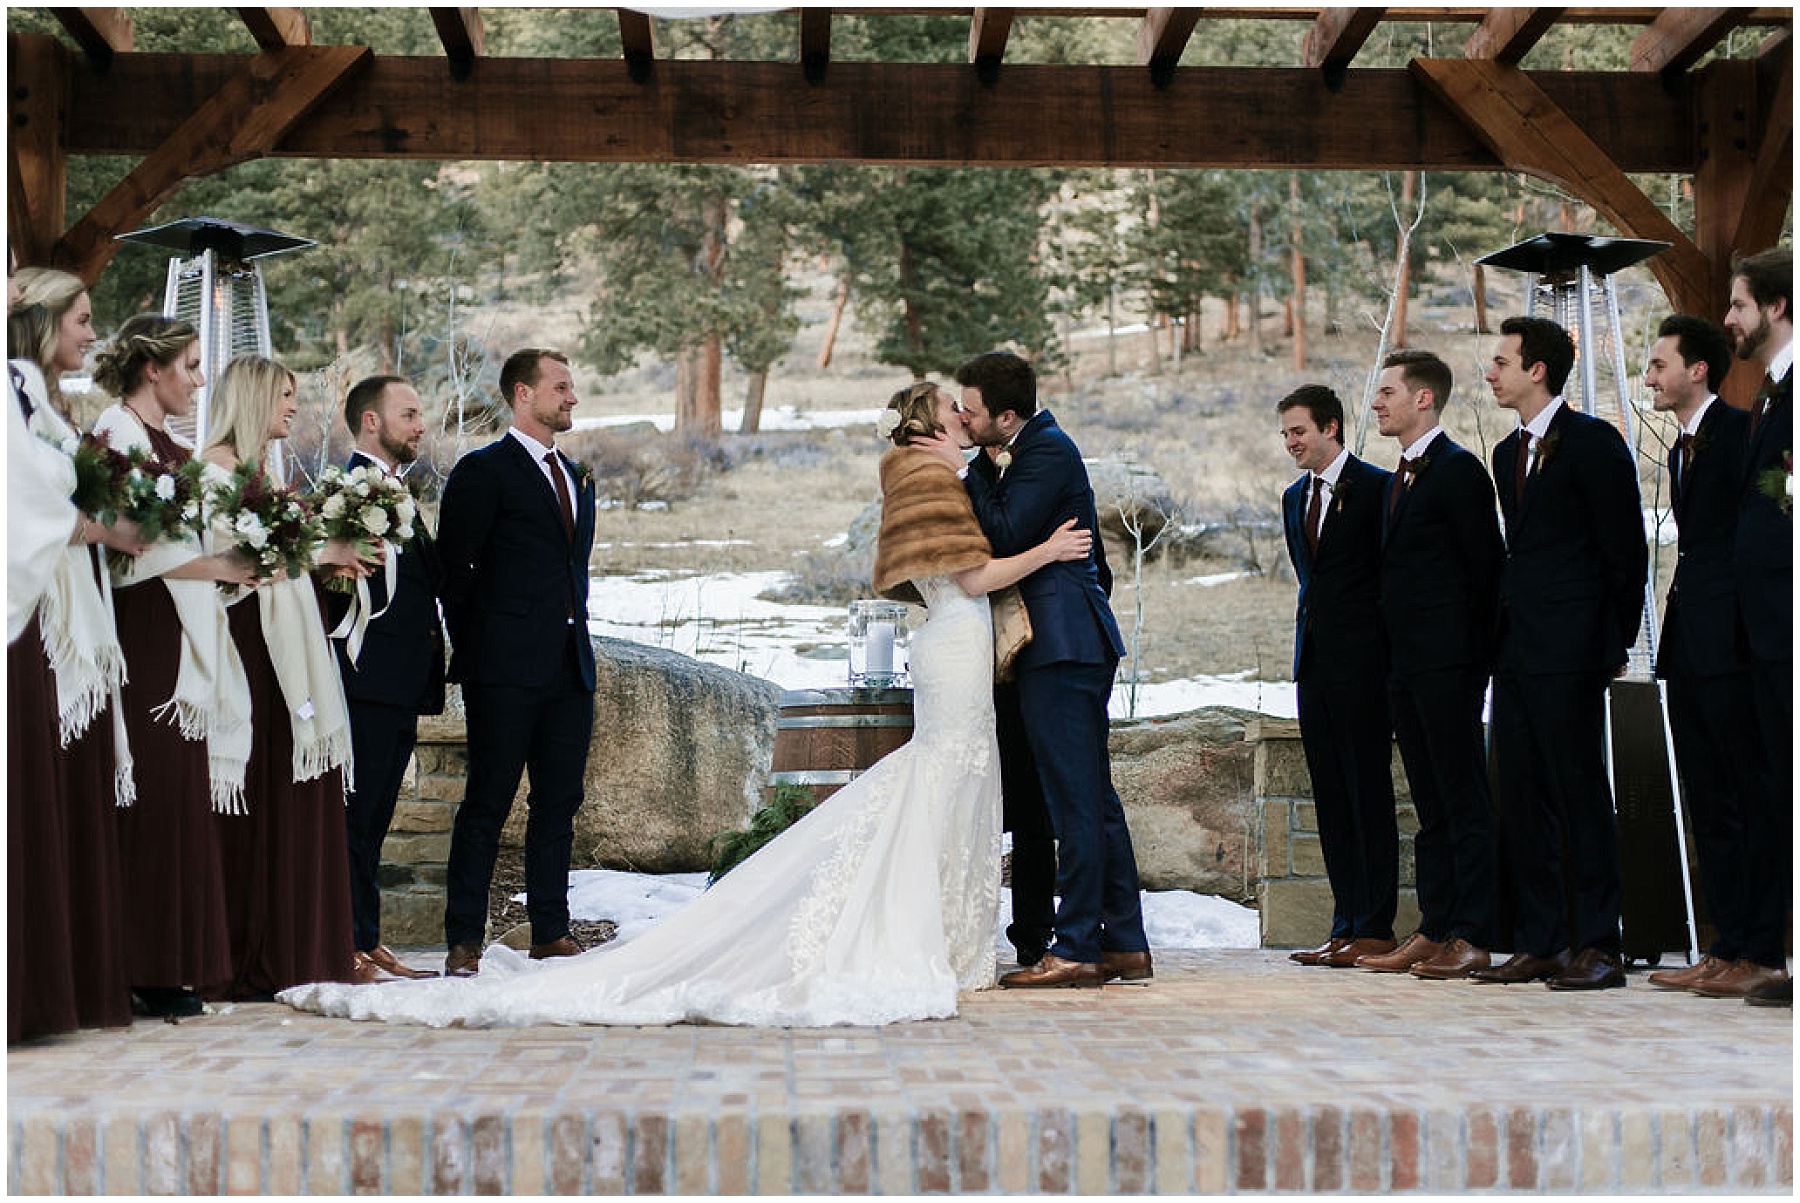 Katesalleyphotography-438_Haley and Dan get married in Estes Park.jpg